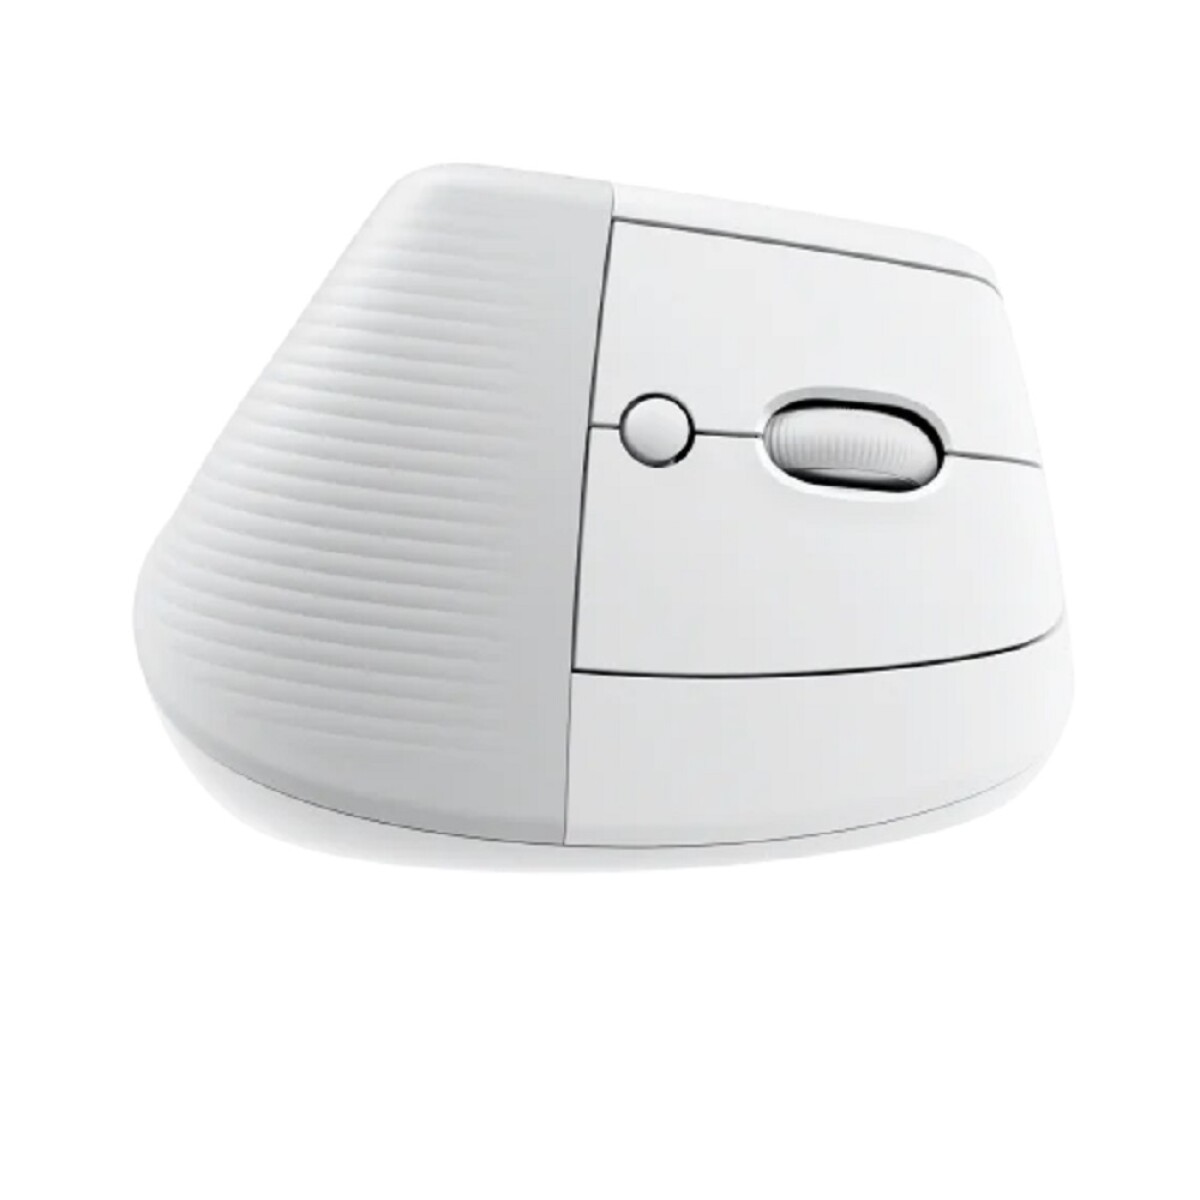 LOGITECH 910-006469 MOUSE LIFT VERTICAL OFF WHITE INAL+BT - Logitech 910-006469 Mouse Lift Vertical Off White Inal+bt 